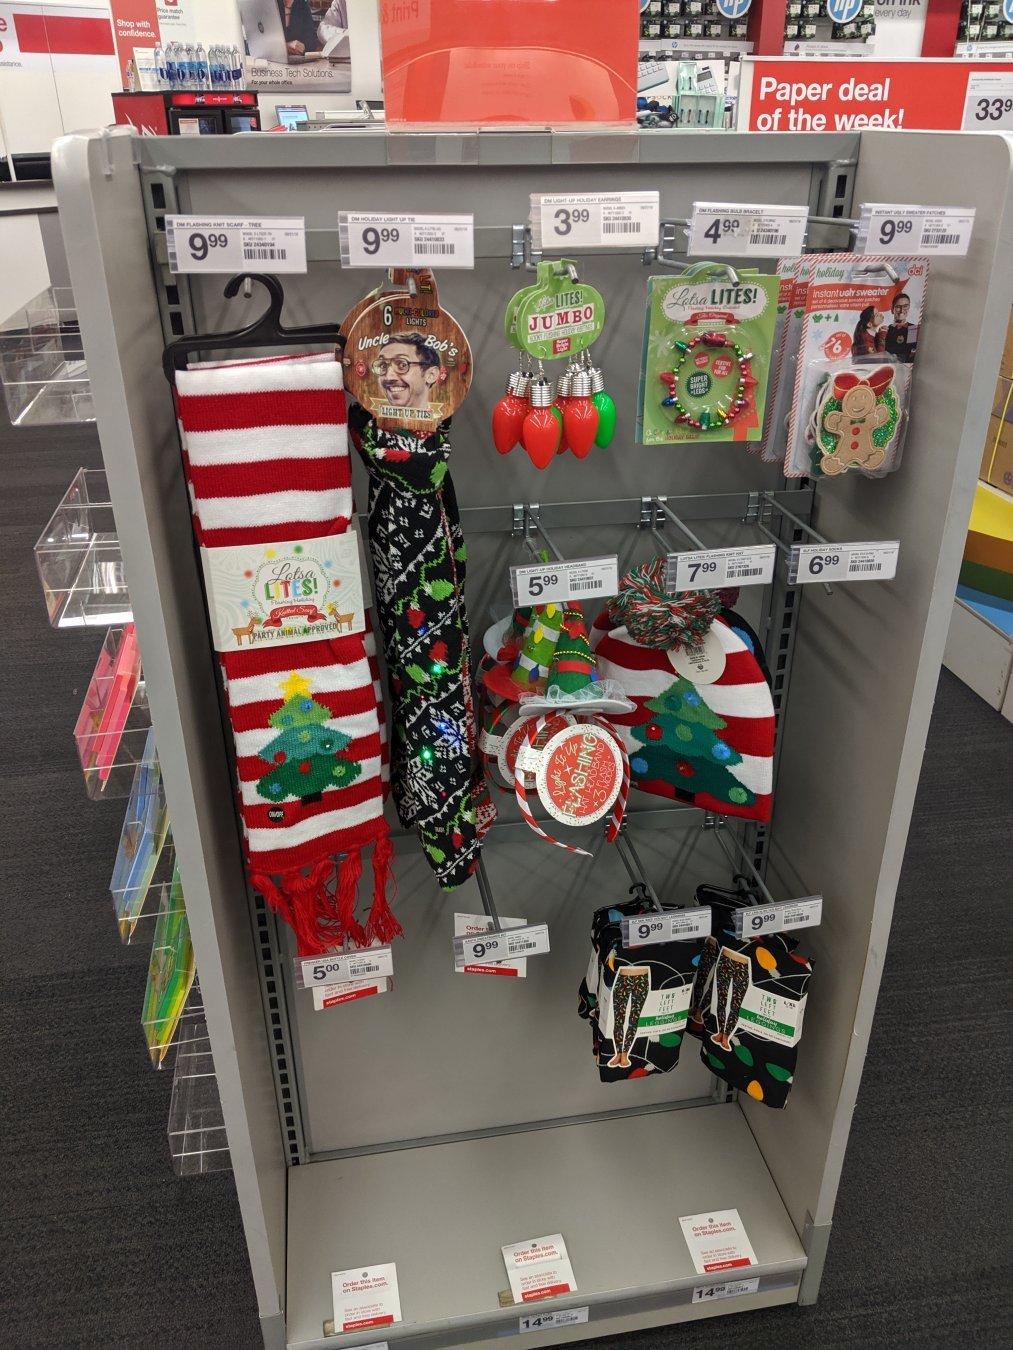 Oh, come on. It's still September. #HolidayCreep is getting ridiculous. Sorry, I mean *more* ridiculous.